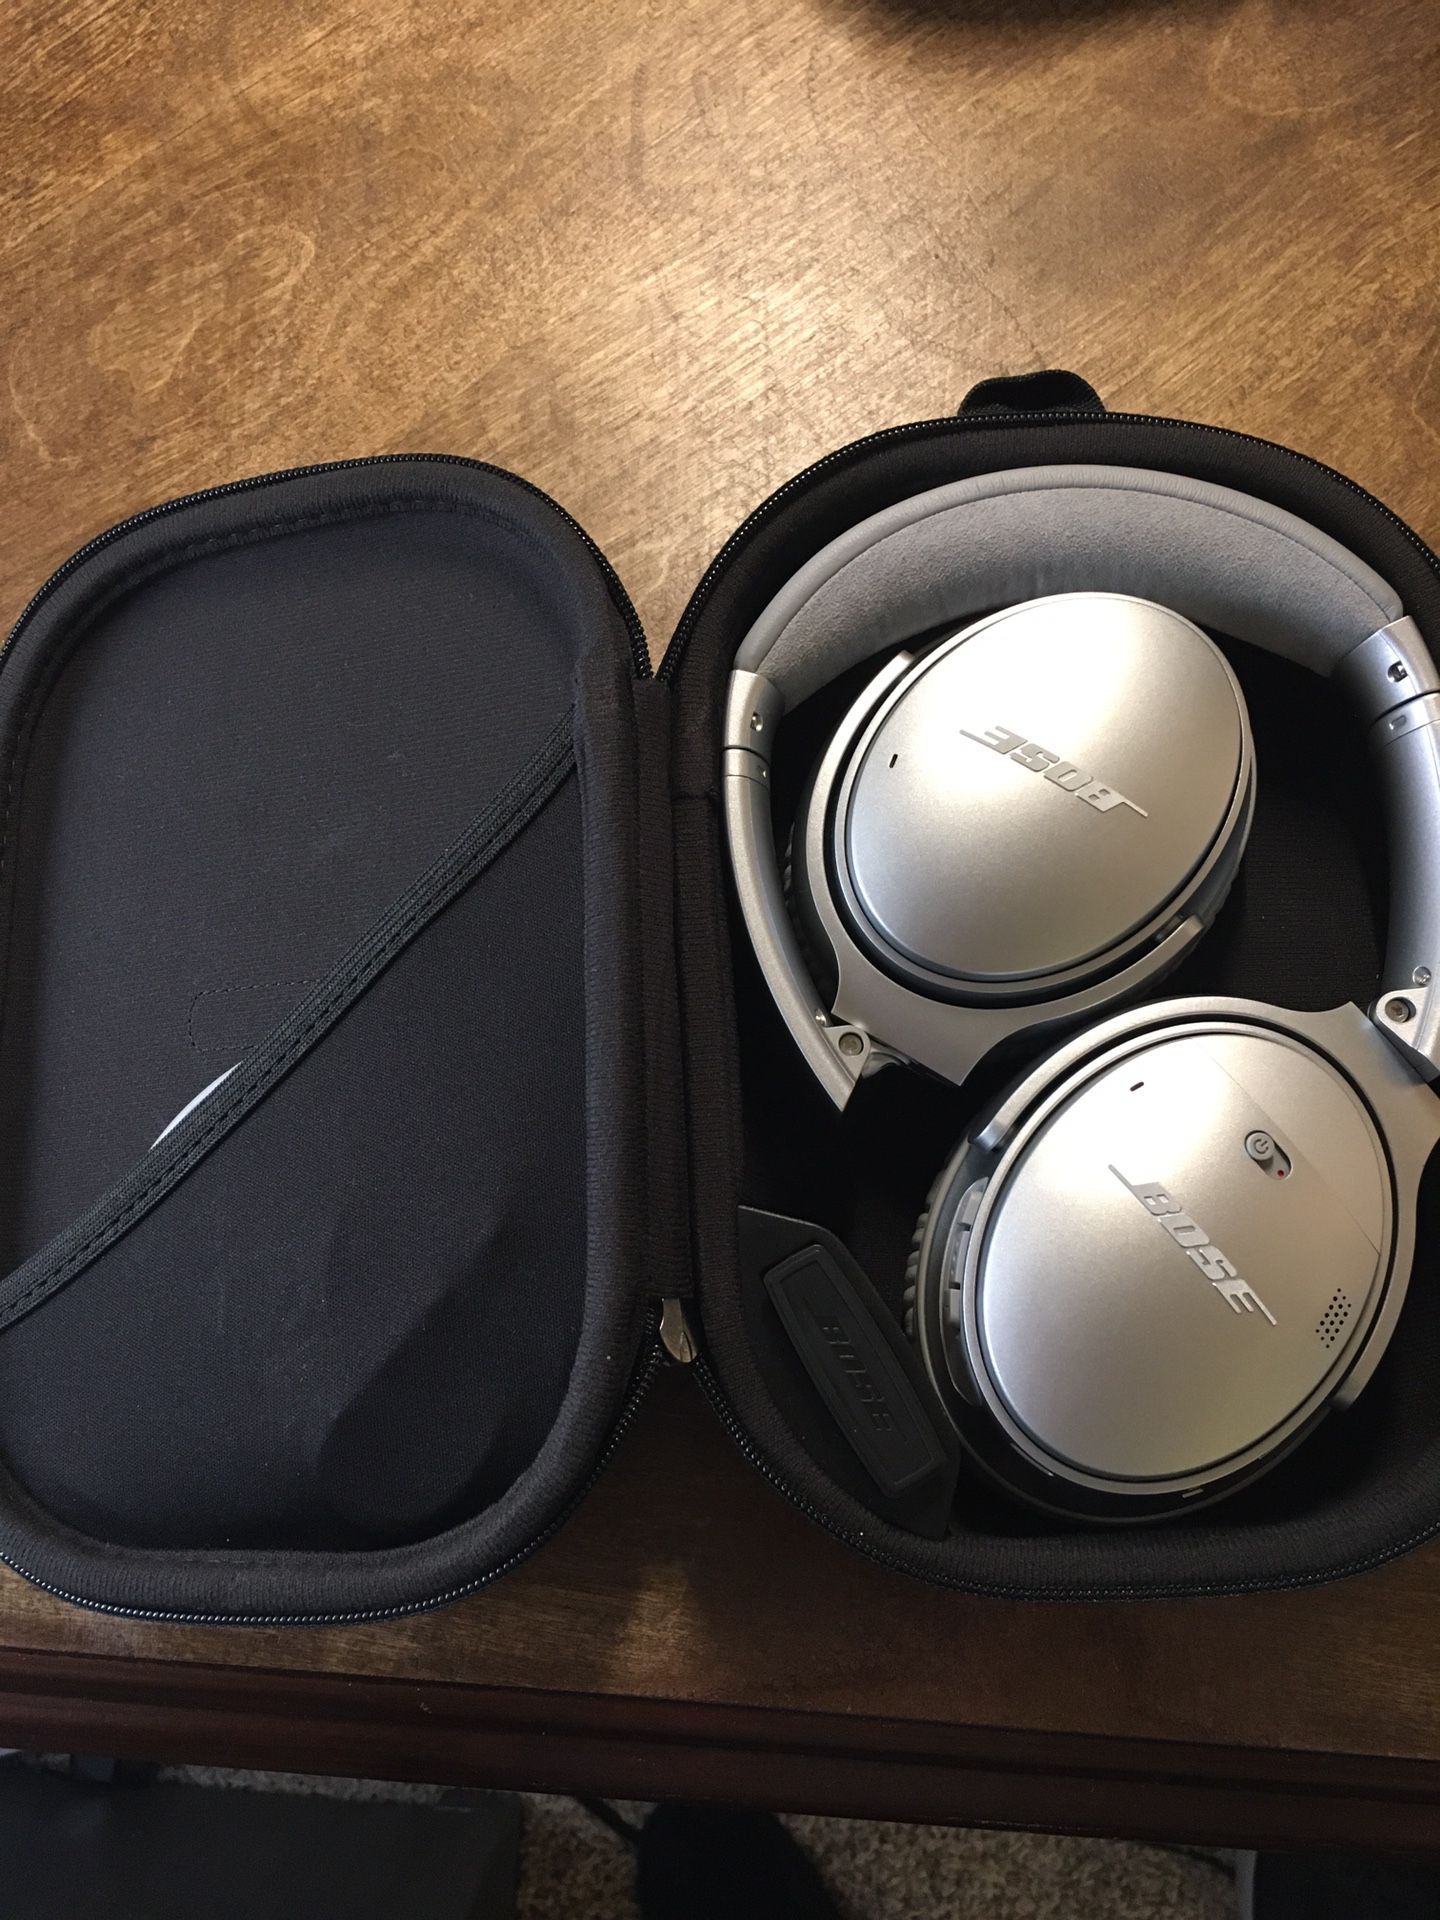 BOSE QC35 Wireless Bluetooth Noise Cancelling Headphones LIKE NEW